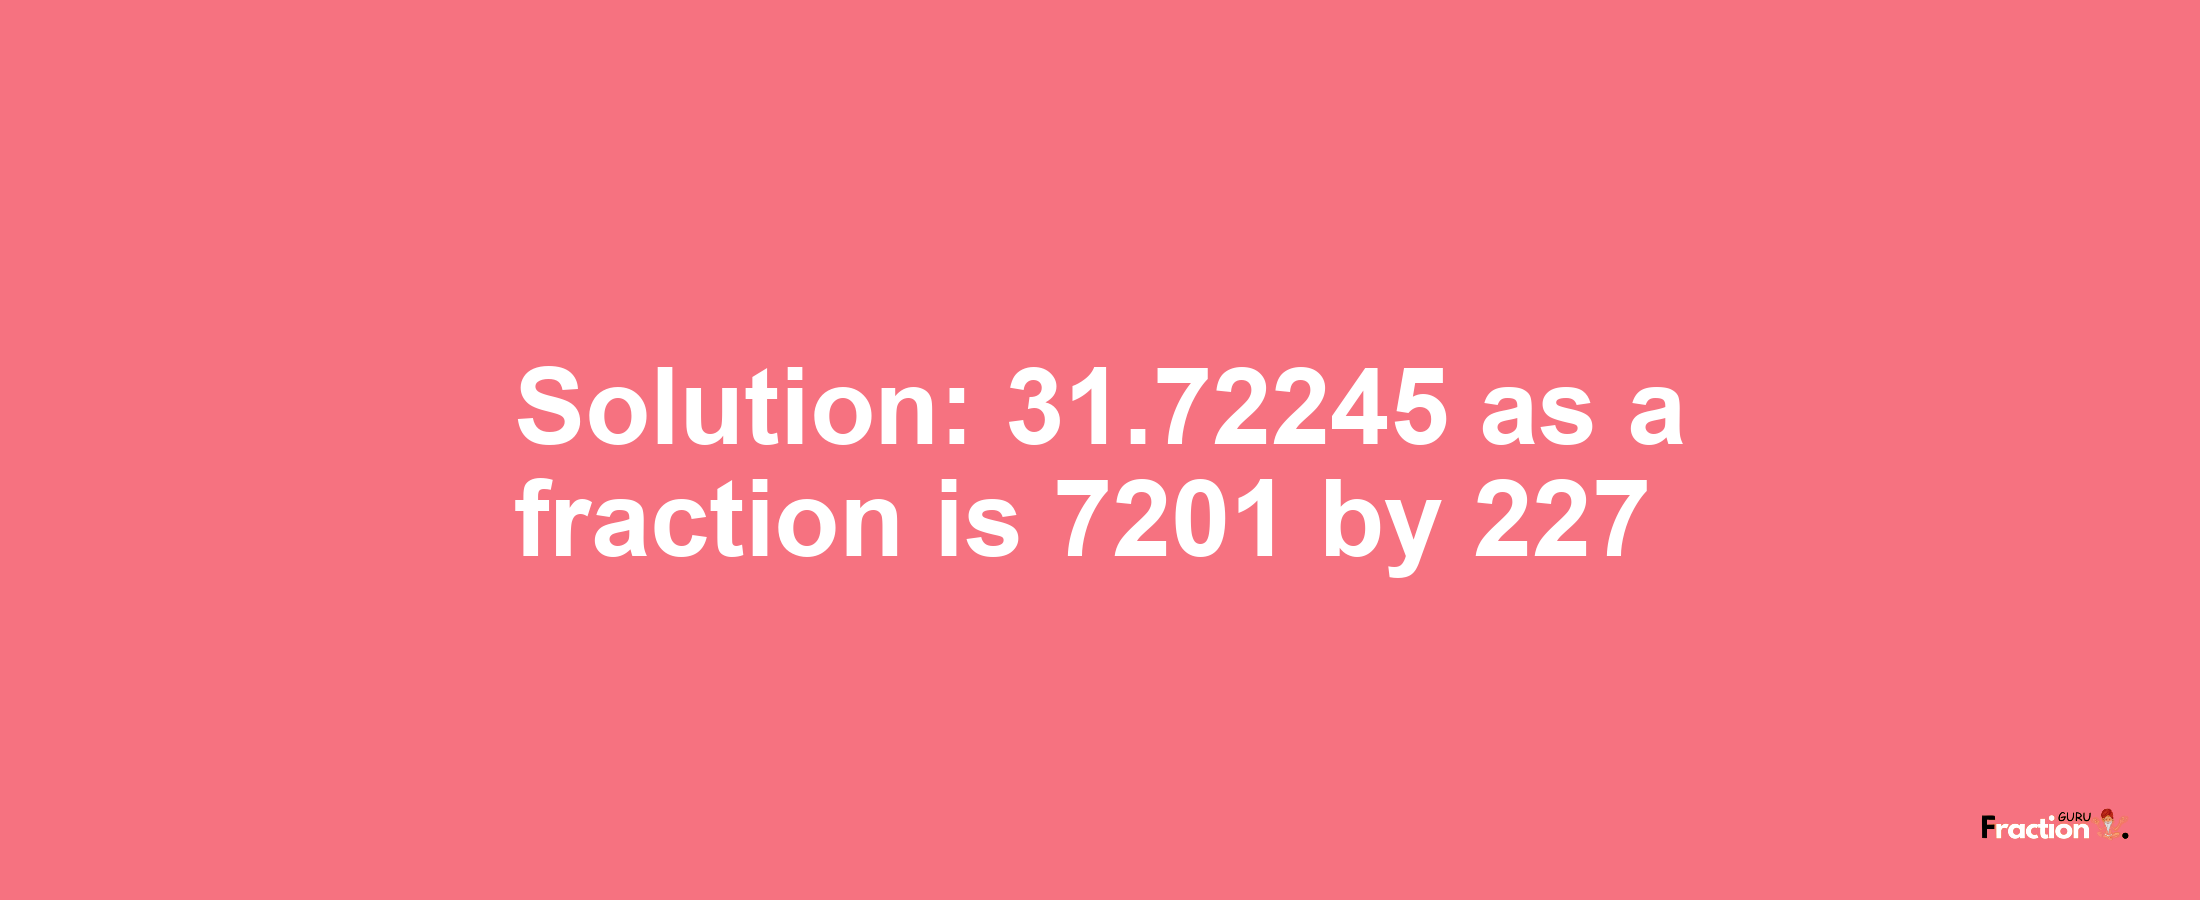 Solution:31.72245 as a fraction is 7201/227